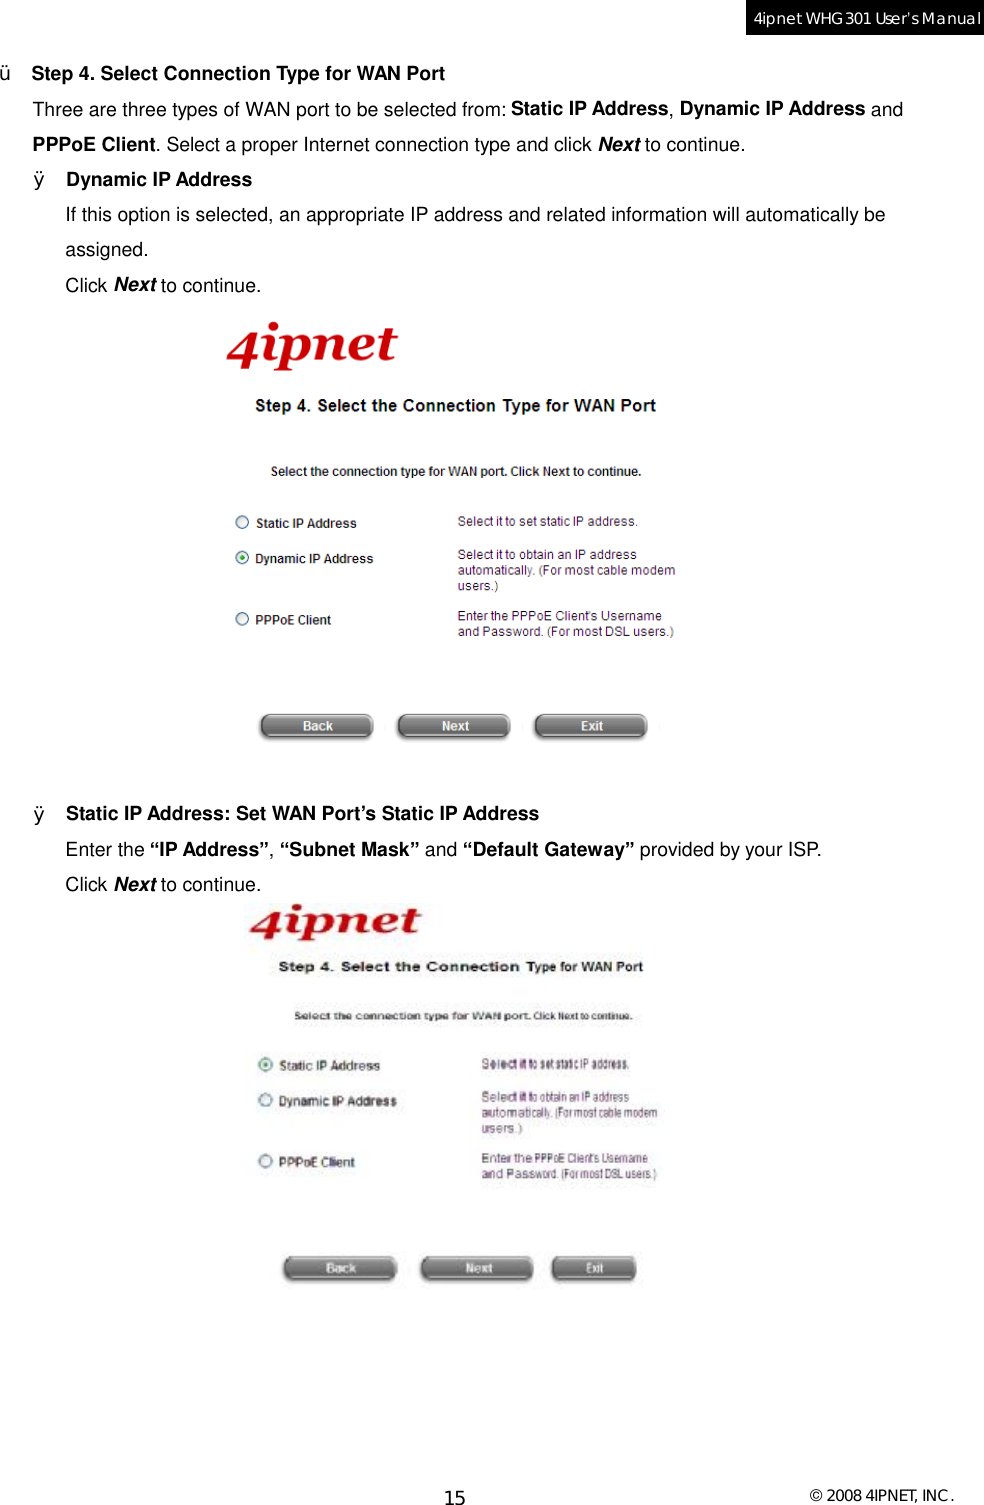  © 2008 4IPNET, INC. 15 4ipnet WHG301 User’s Manual  Ÿ  Step 4. Select Connection Type for WAN Port Three are three types of WAN port to be selected from: Static IP Address, Dynamic IP Address and PPPoE Client. Select a proper Internet connection type and click Next to continue.  Ø Dynamic IP Address If this option is selected, an appropriate IP address and related information will automatically be assigned. Click Next to continue.   Ø Static IP Address: Set WAN Port’s Static IP Address Enter the “IP Address”, “Subnet Mask” and “Default Gateway” provided by your ISP. Click Next to continue.  